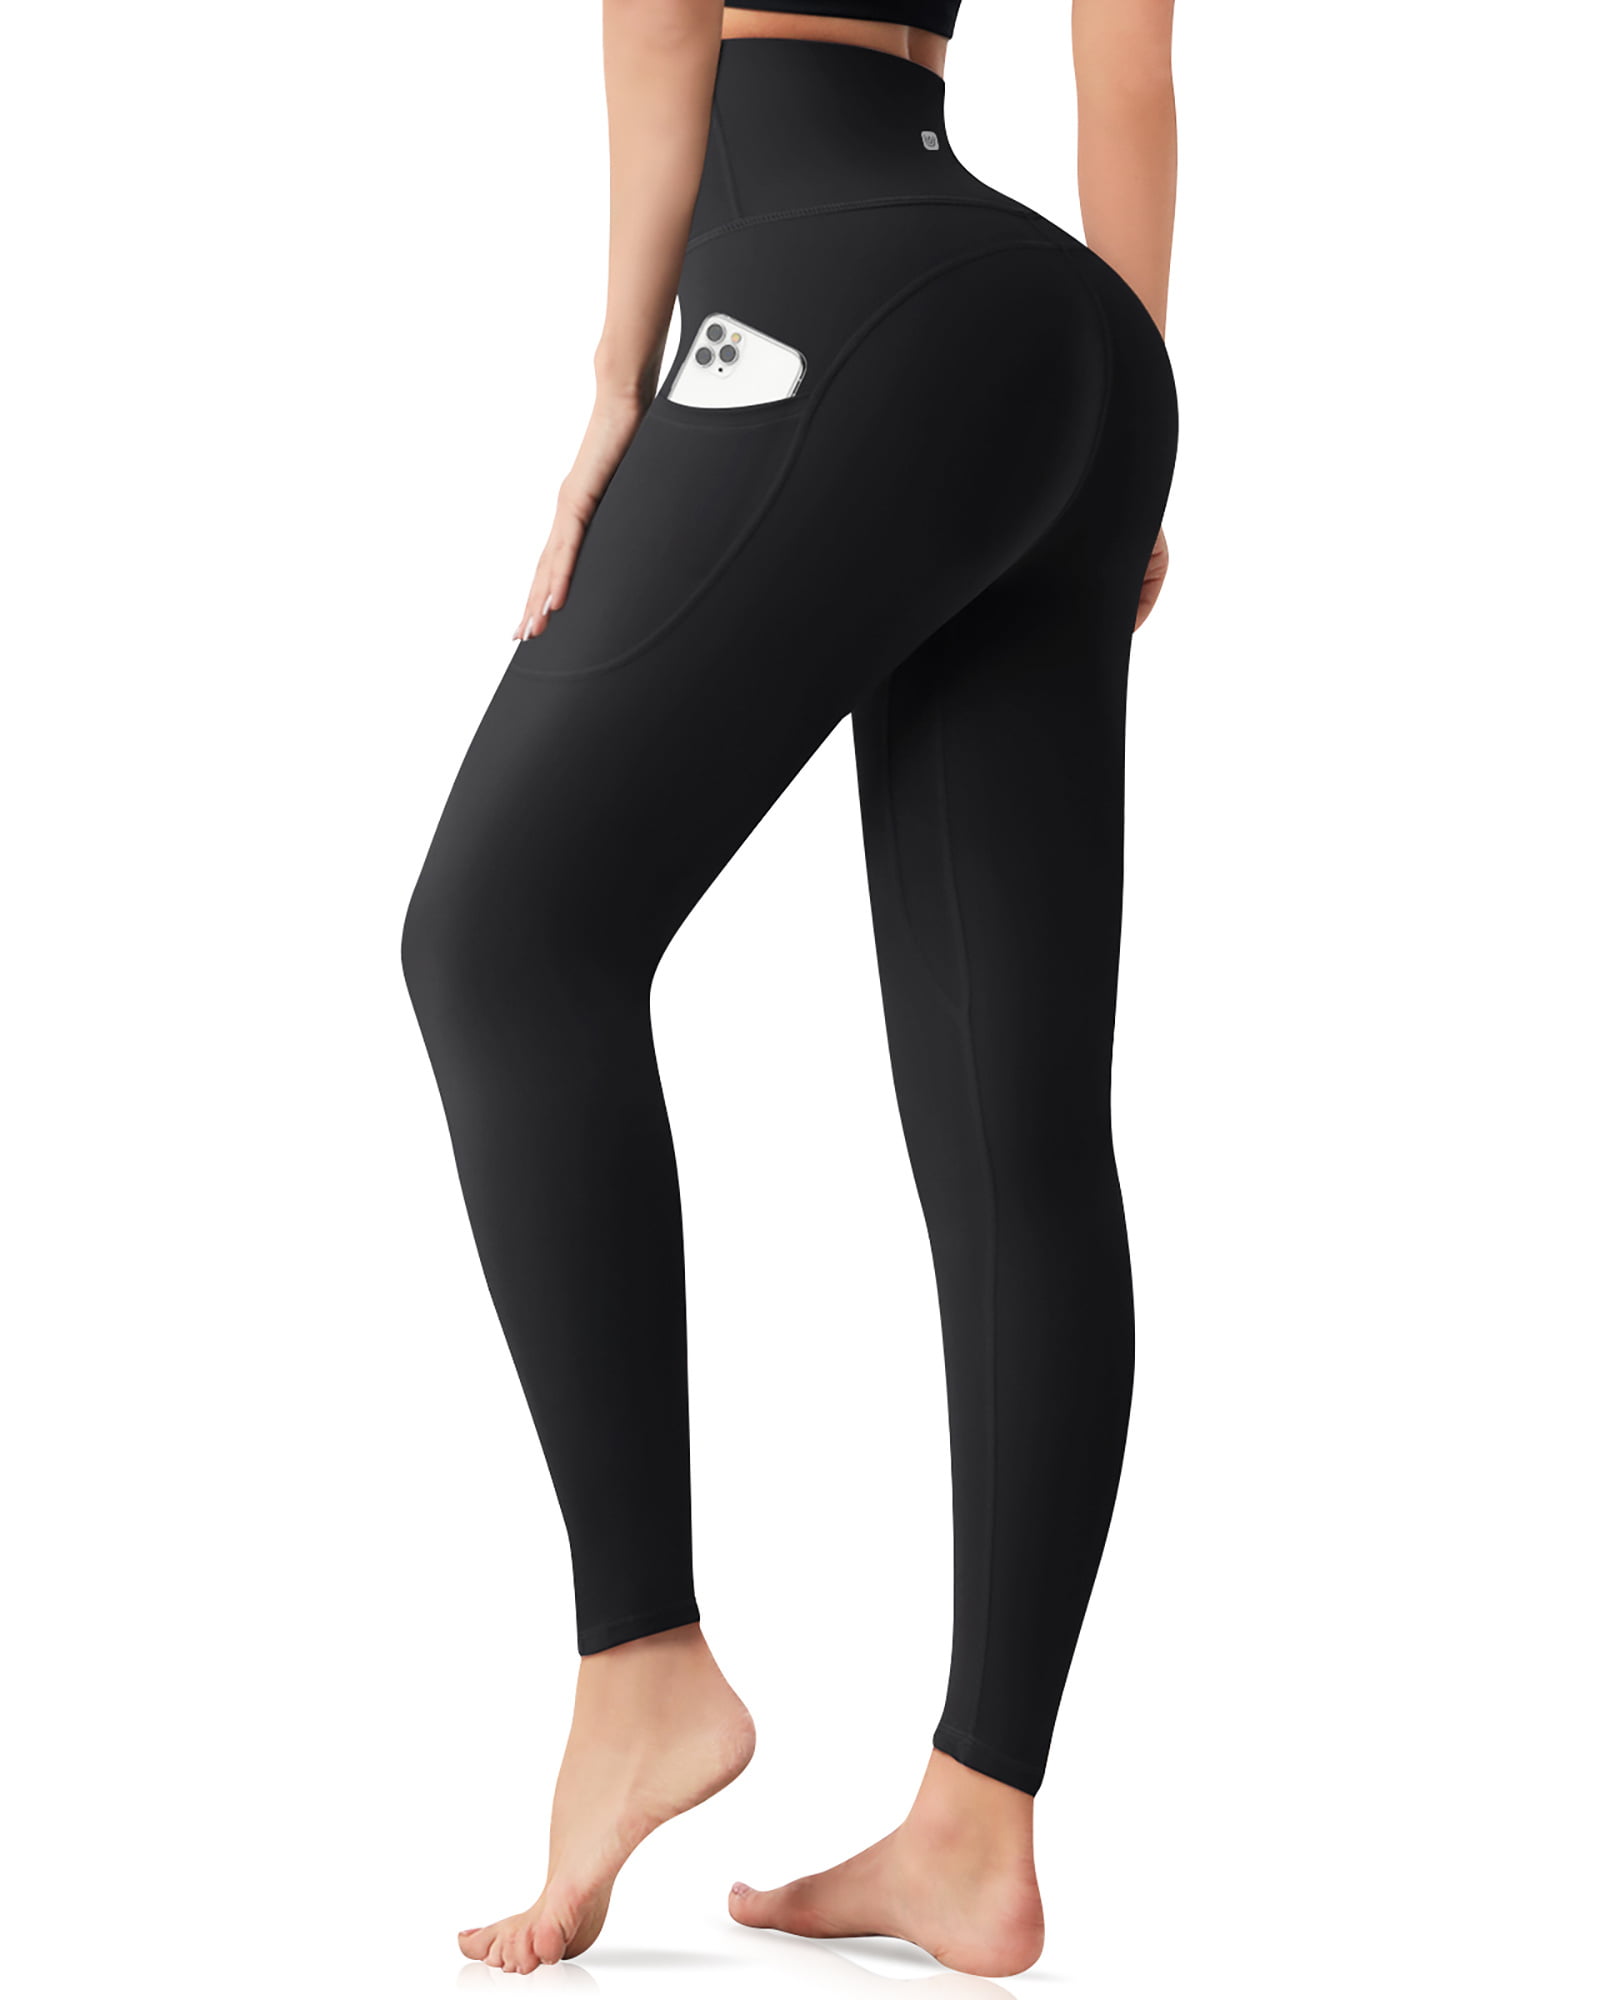 UUE 19Inseam Black High Waist Leggings,Yoga leggings for women with Pockets,High  Waisted Yoga Pants for Workout 